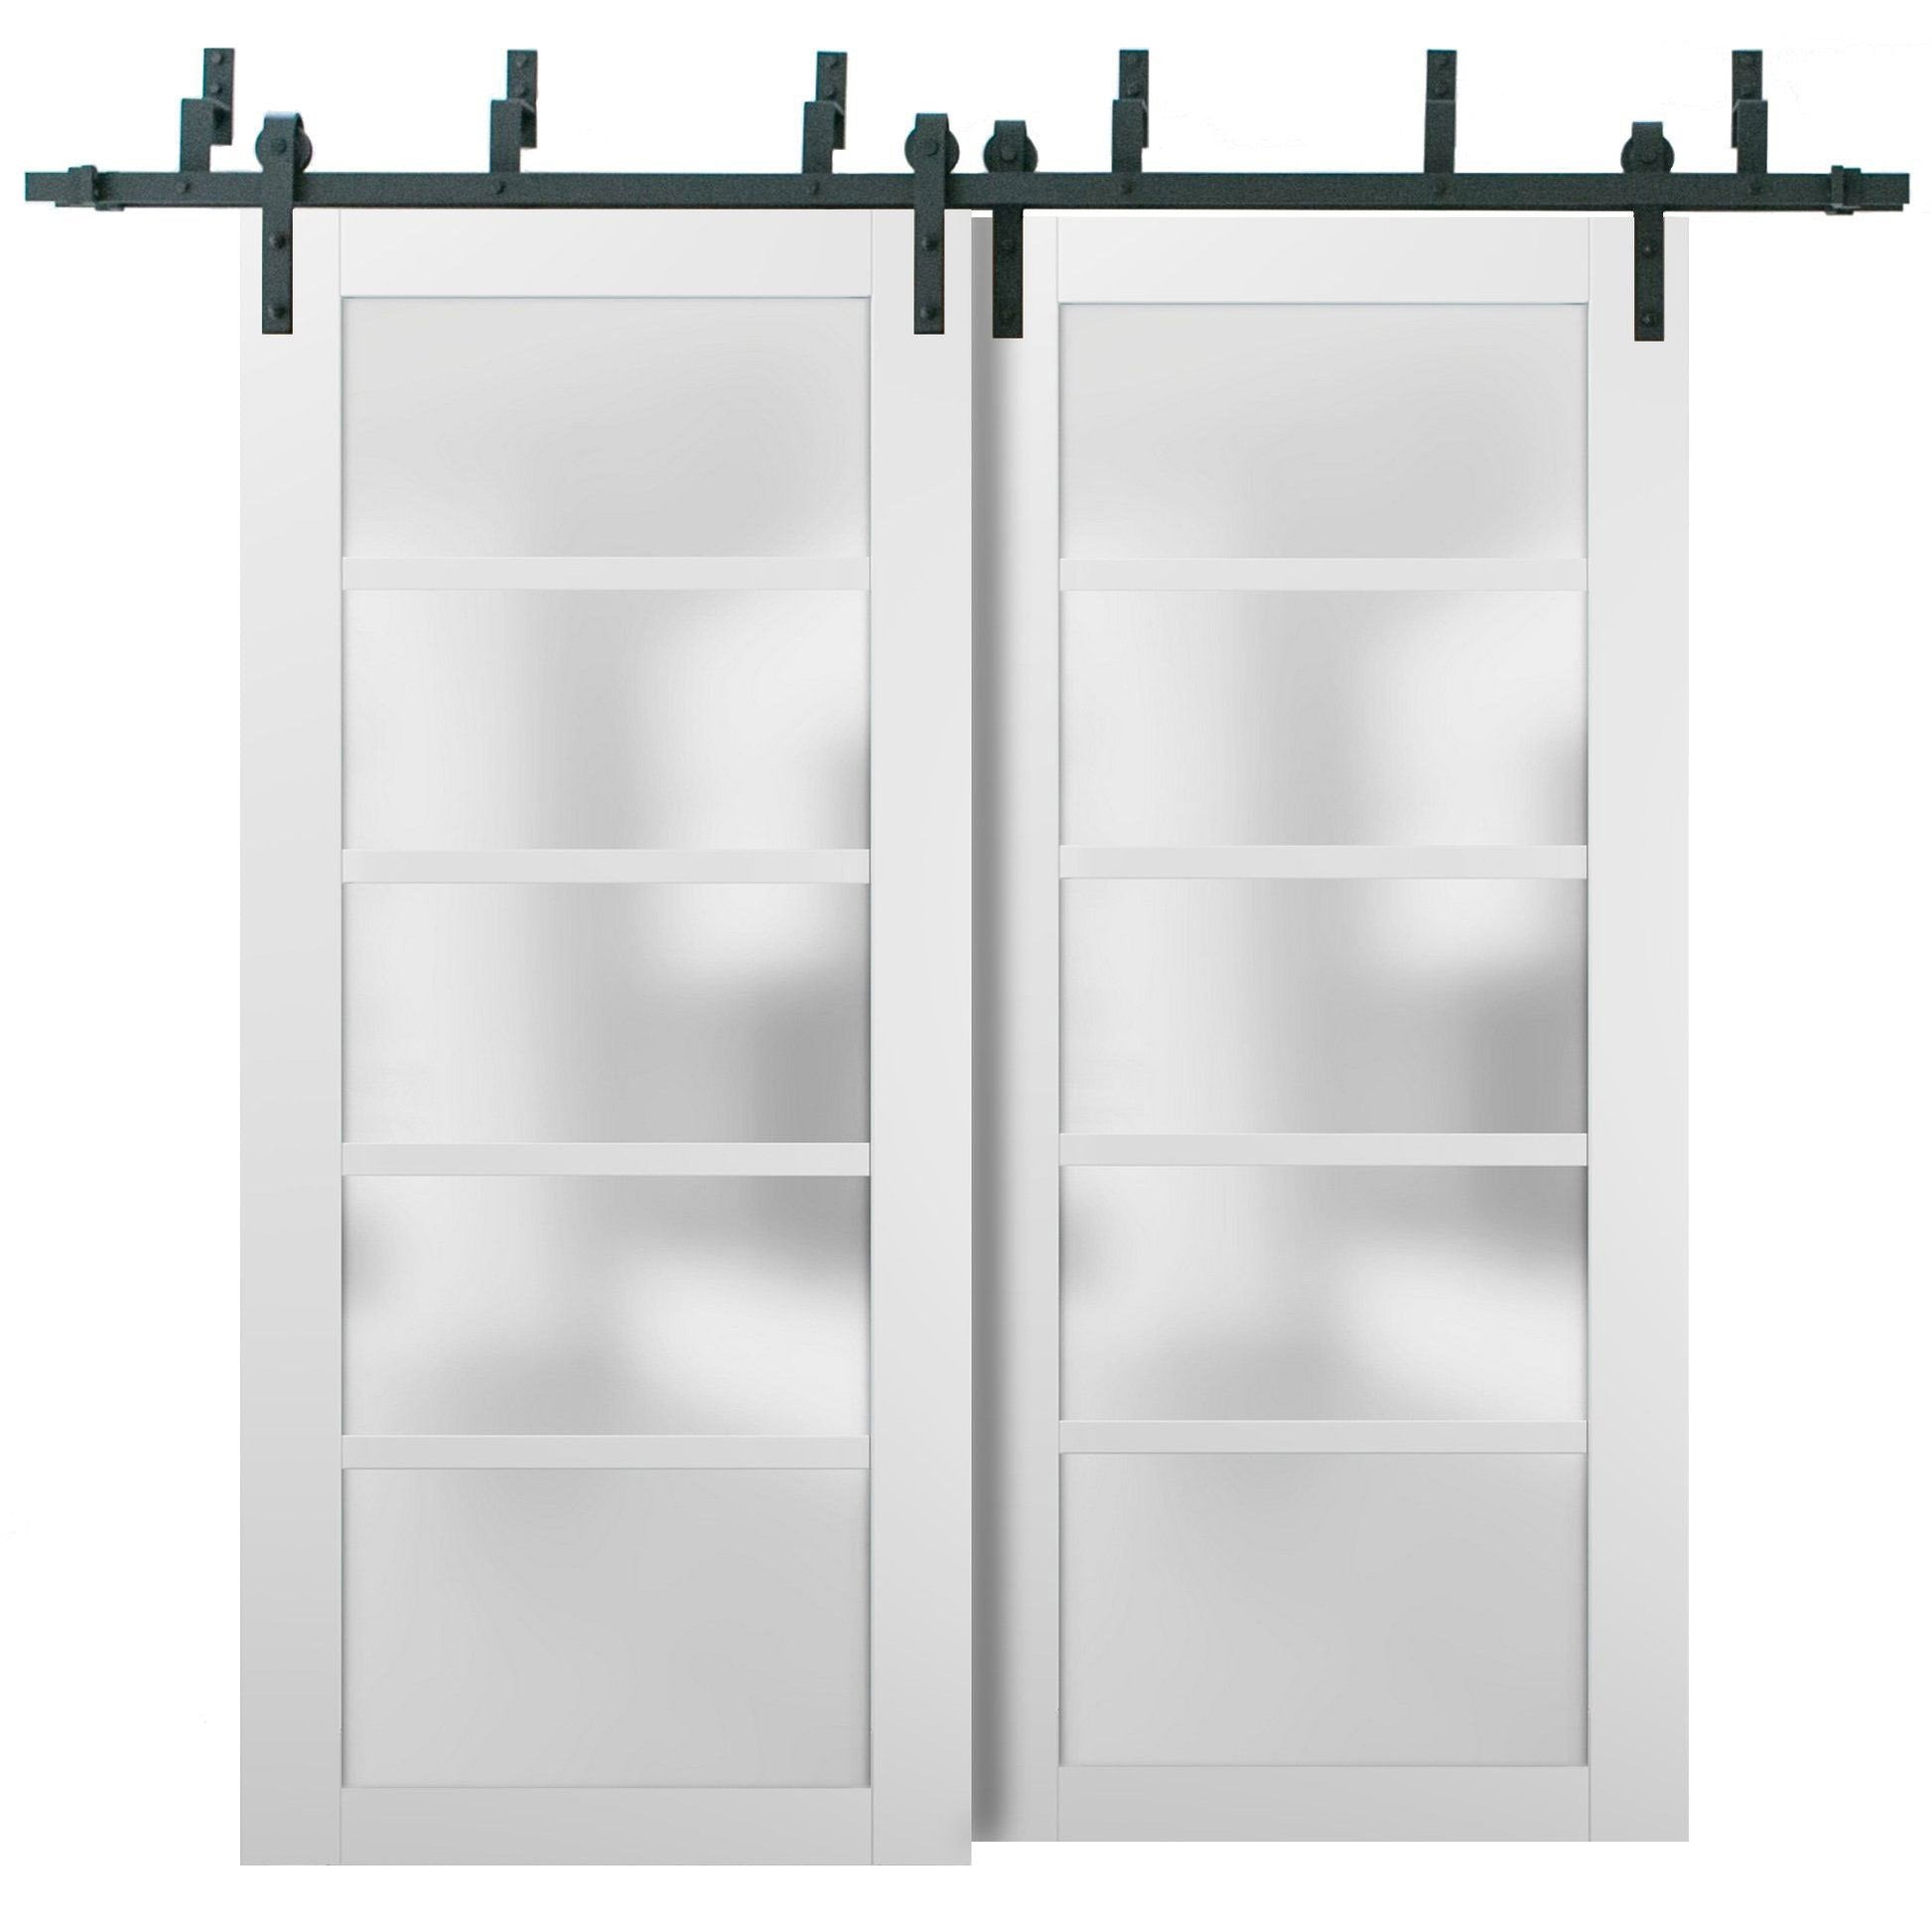 Quadro 4002 White Silk Double Barn Door with Frosted Glass | Black Bypass Rails